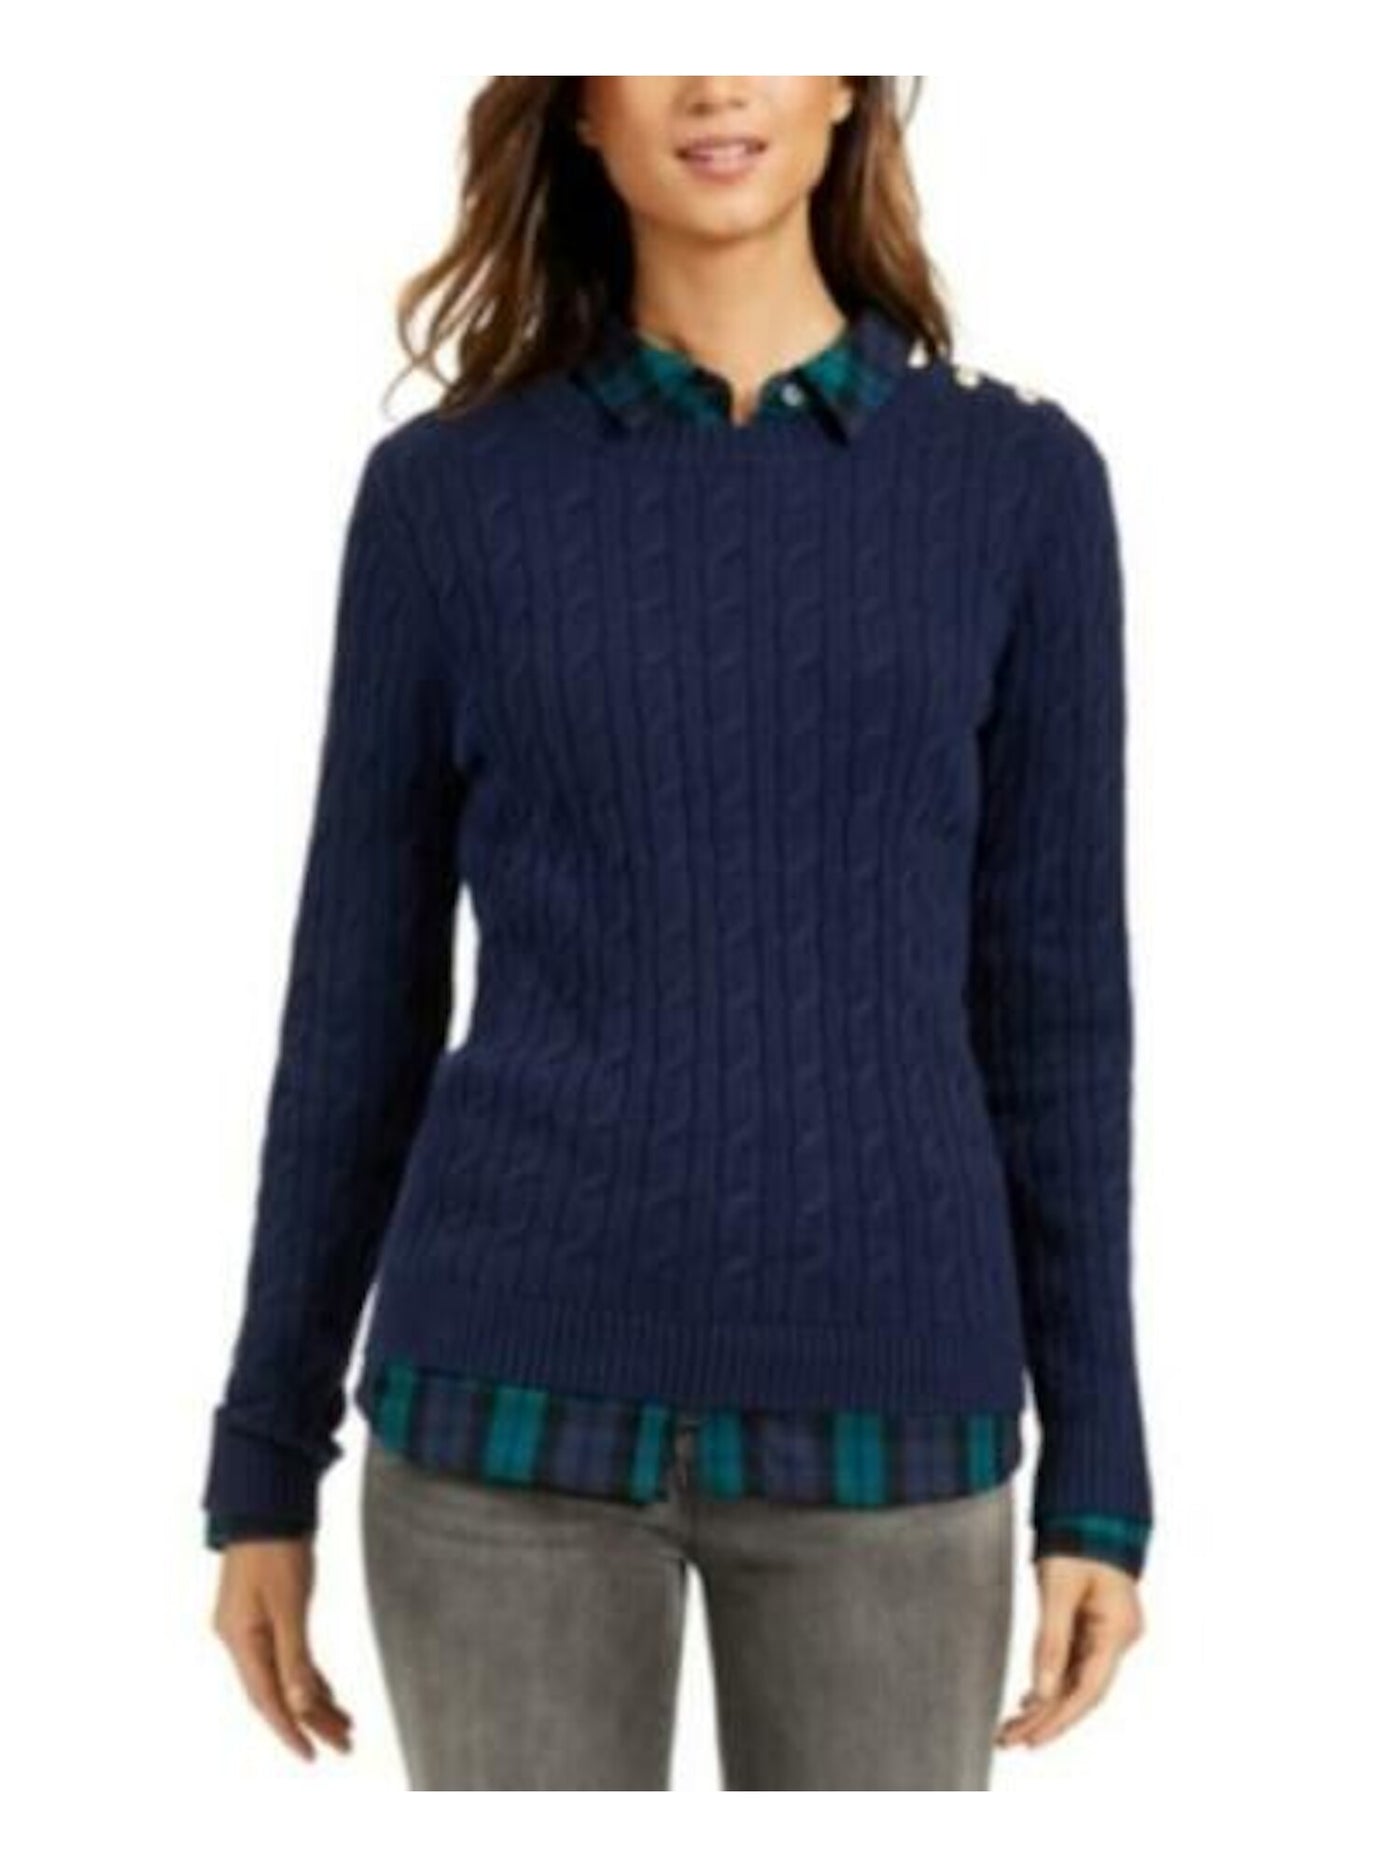 CHARTER CLUB Womens Navy Textured Embellished Long Sleeve Jewel Neck Sweater L